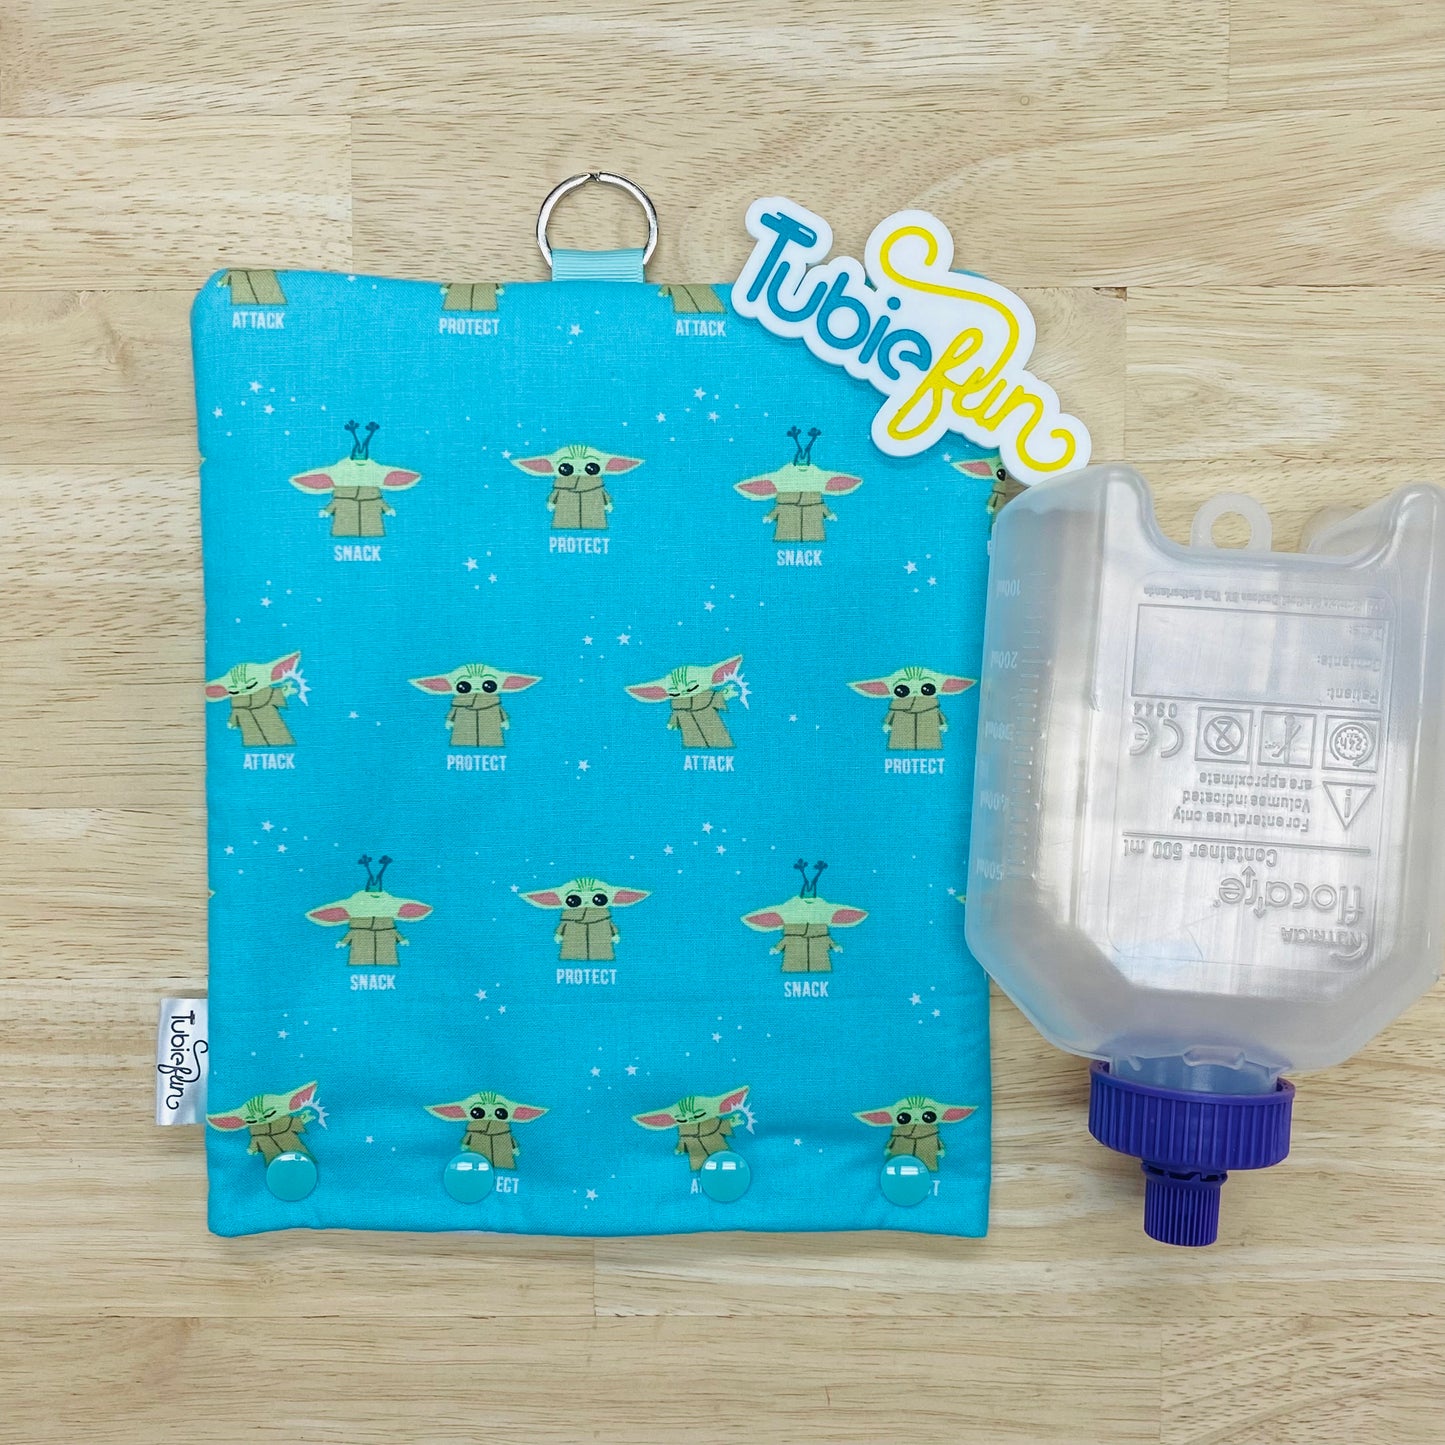 Insulated Milk Bag Suitable for 500ml Flocare Bottle in - Protect, Attack, Snack